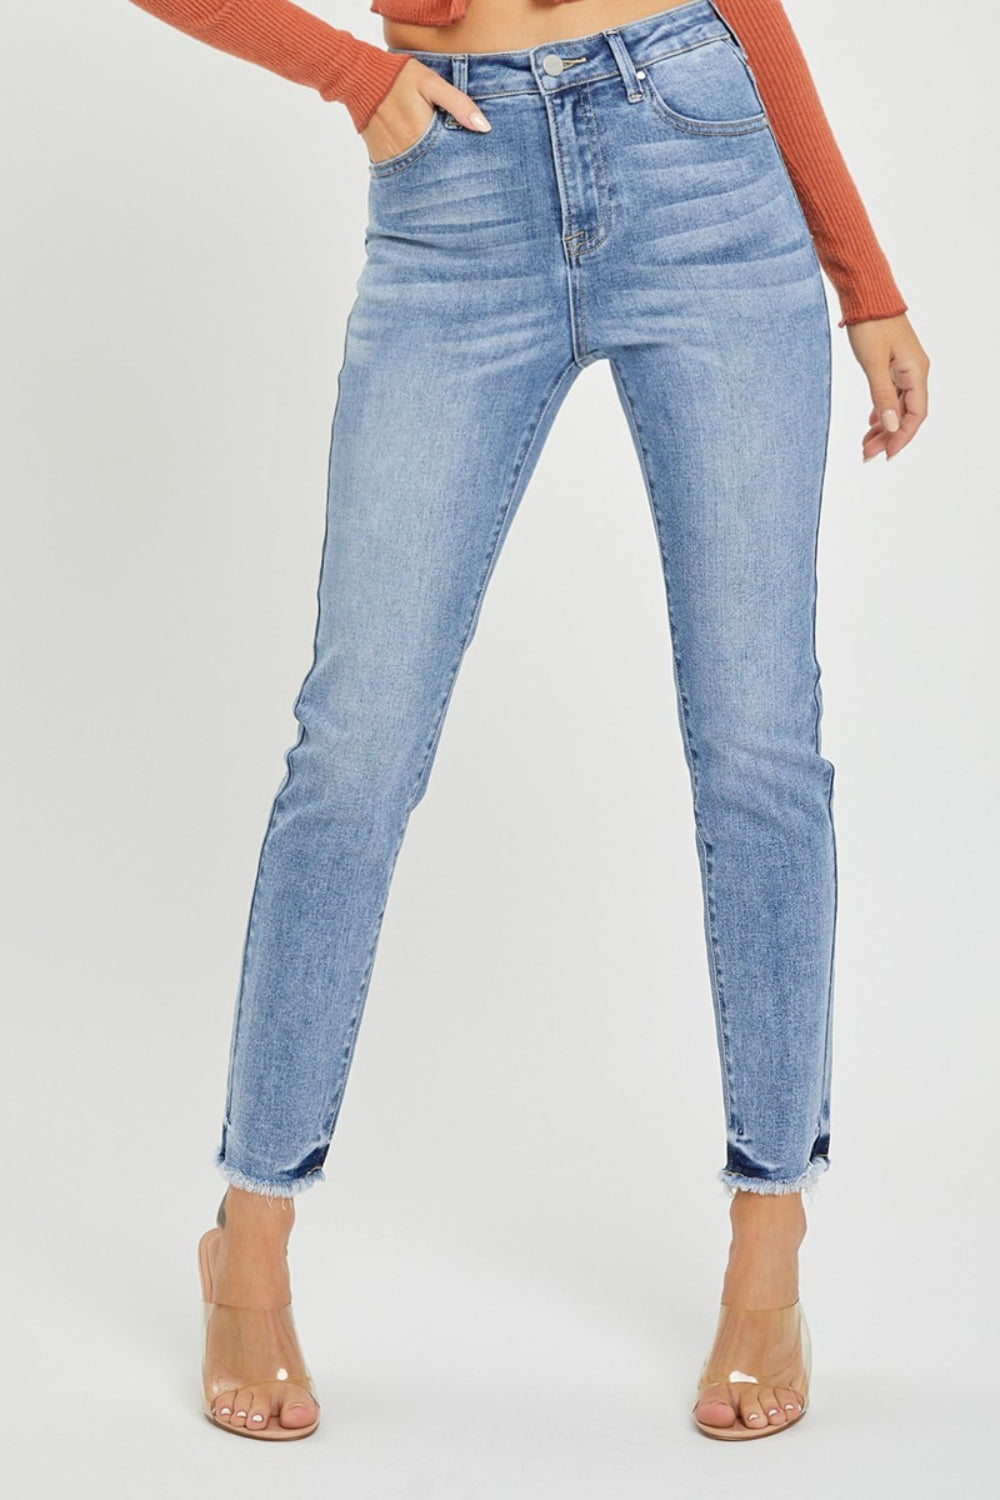 RISEN Full Size High Rise Frayed Hem Skinny Jeans-Denim-Inspired by Justeen-Women's Clothing Boutique in Chicago, Illinois